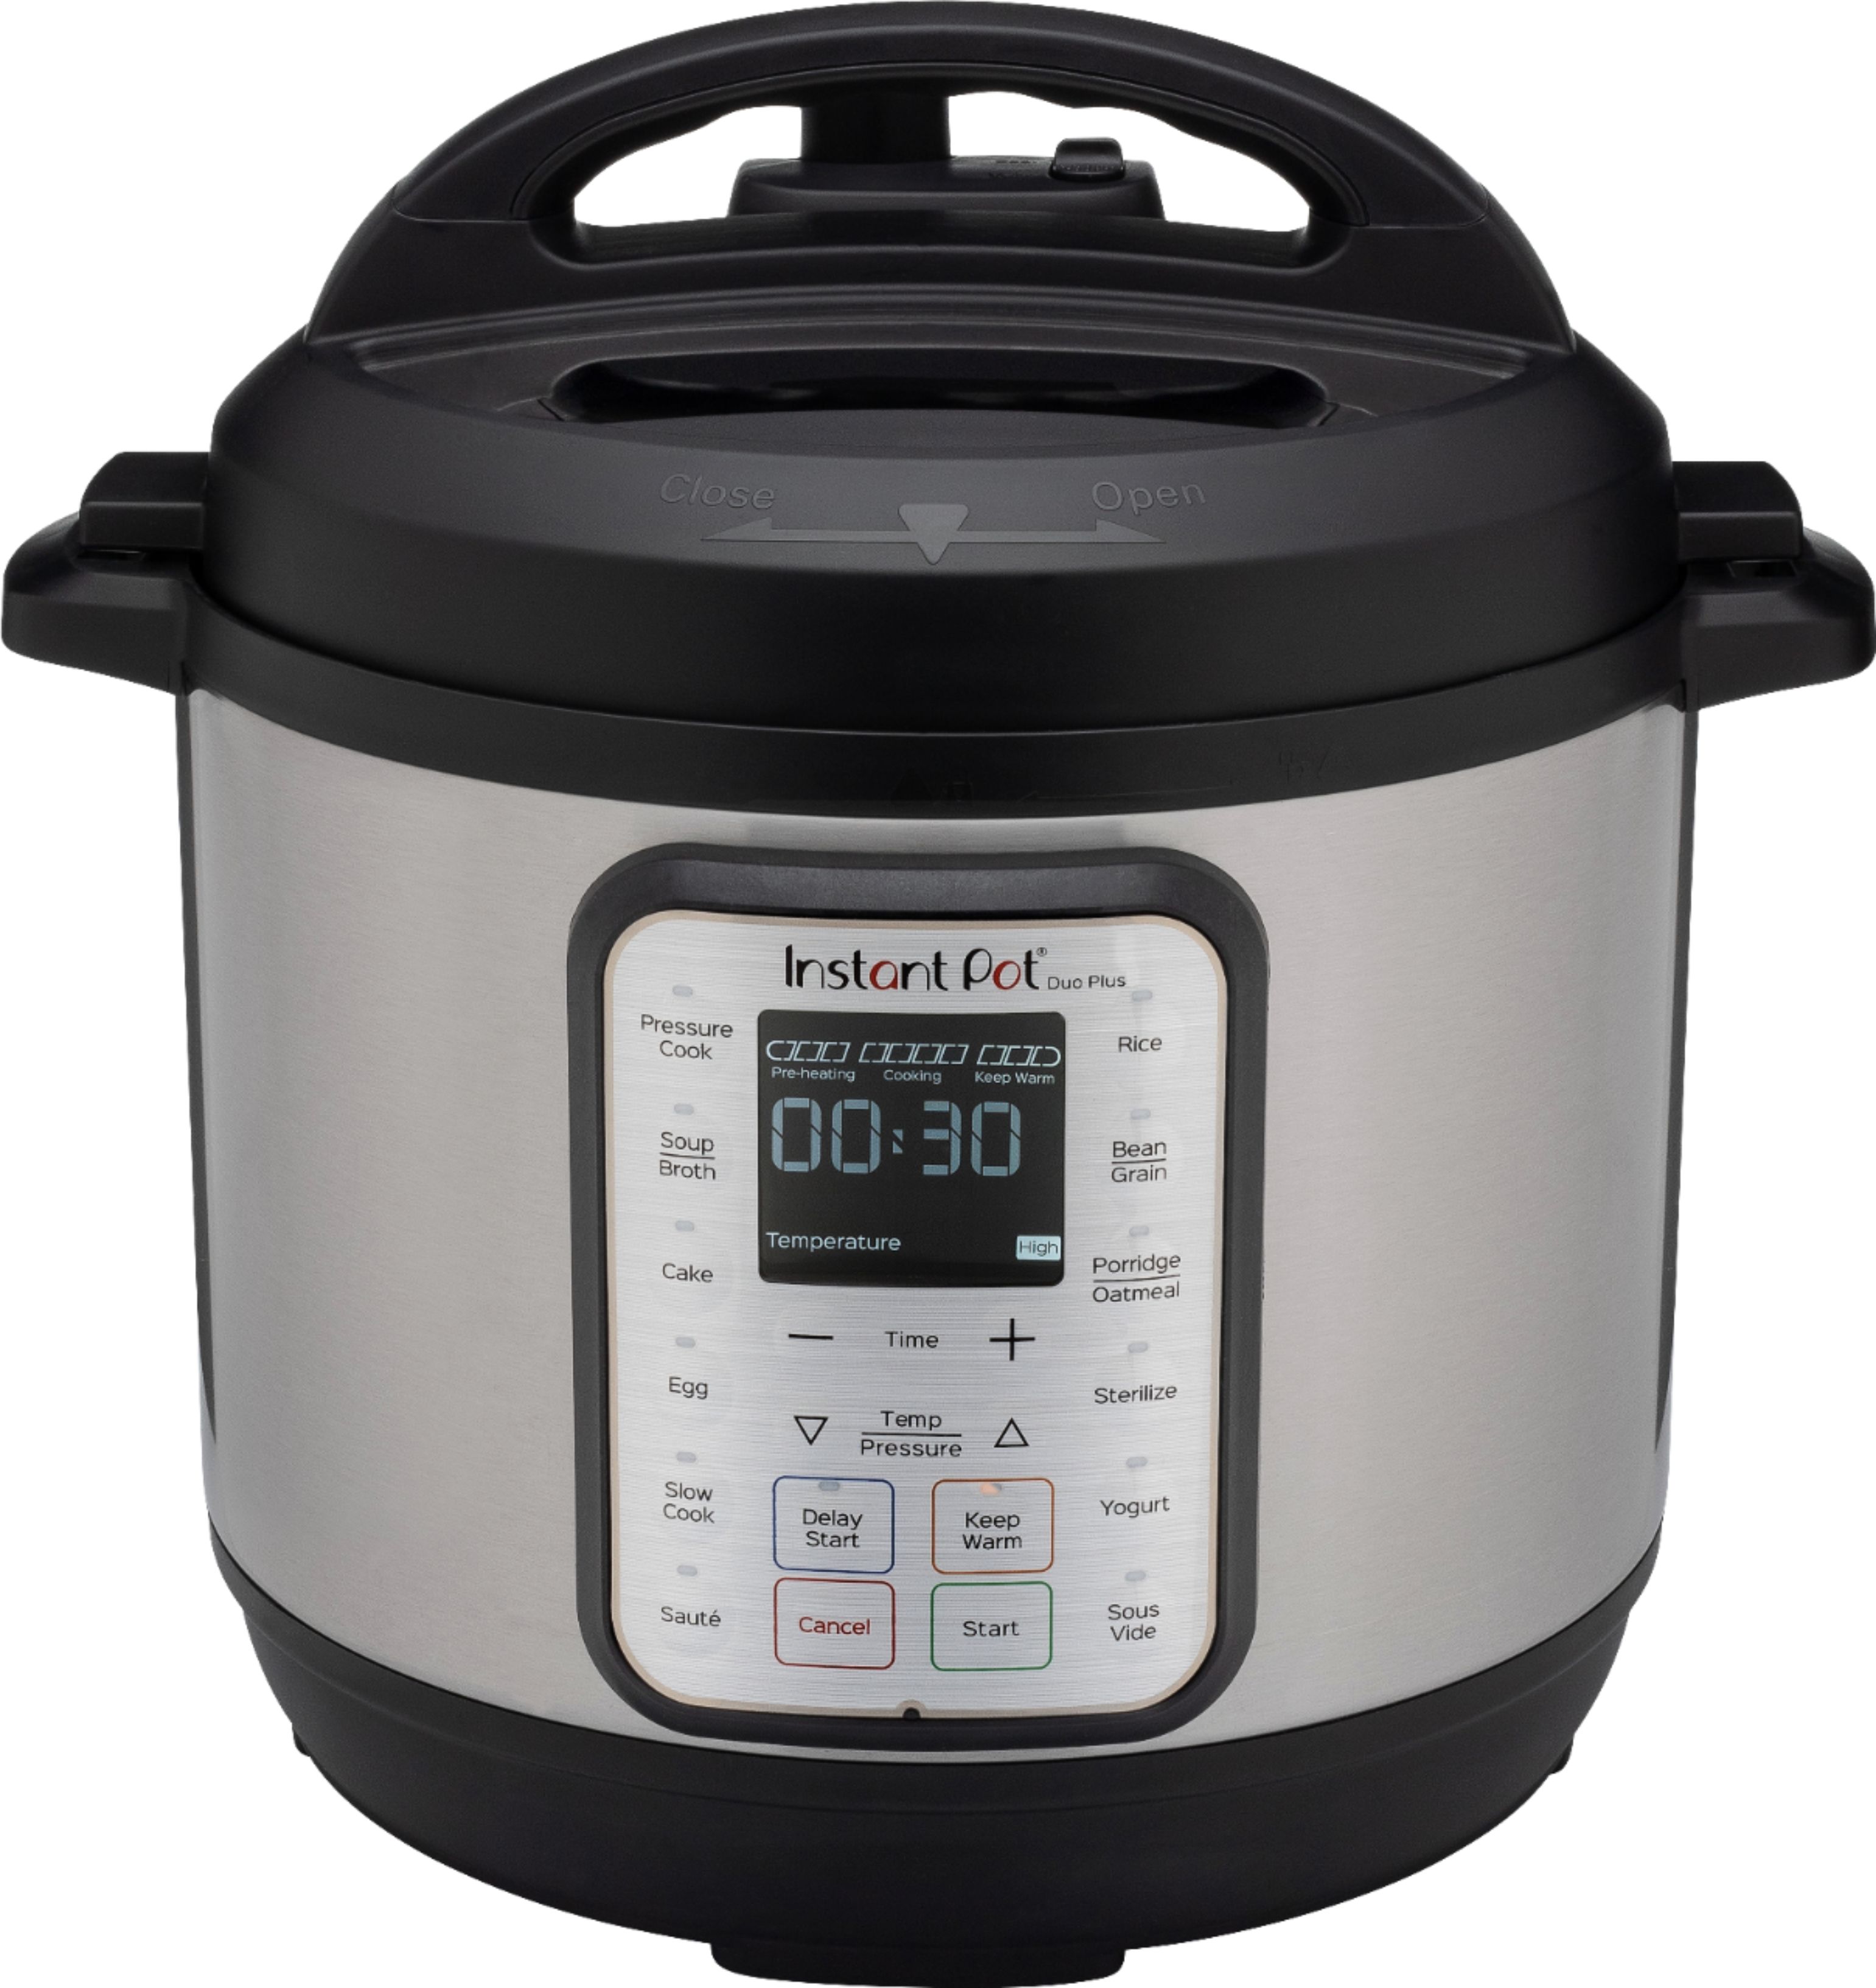 Angle View: Instant Pot DUO Plus 6qt 9-in-1 Multi- Use Programmable Slow Cooker